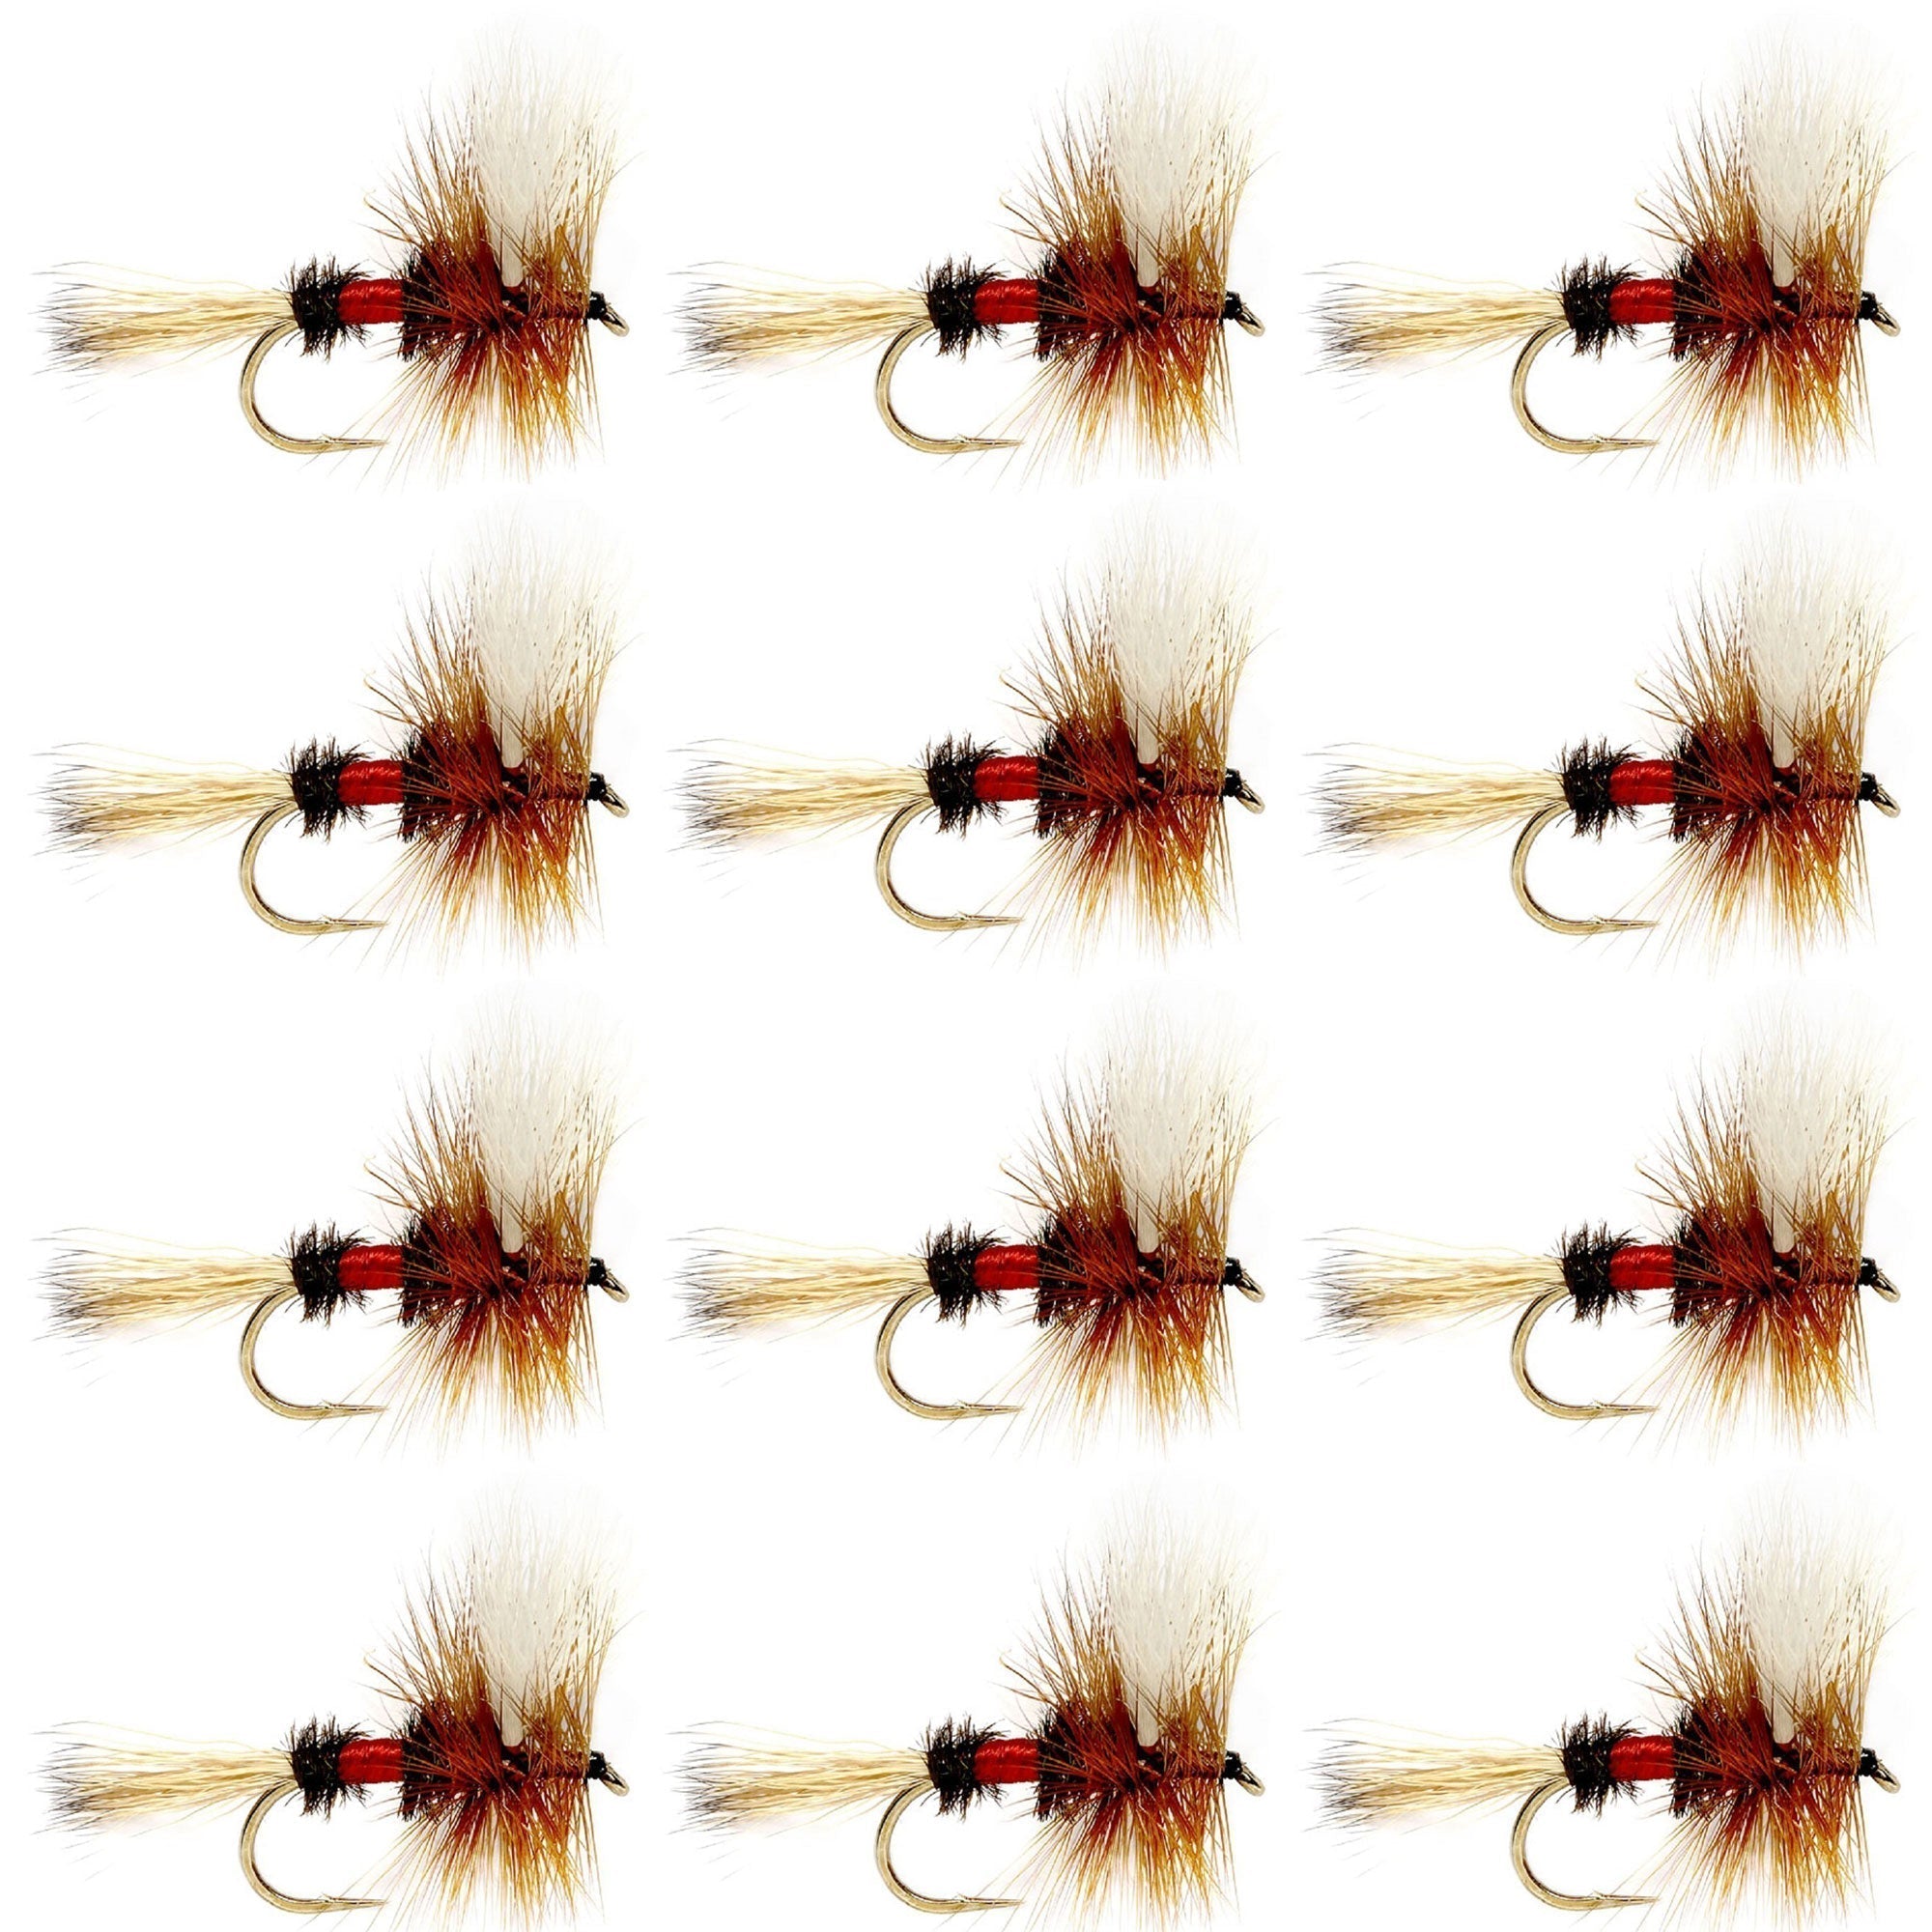 Royal Wulff Classic Trout Dry Fly Fishing Flies - Set of 6 Flies Size